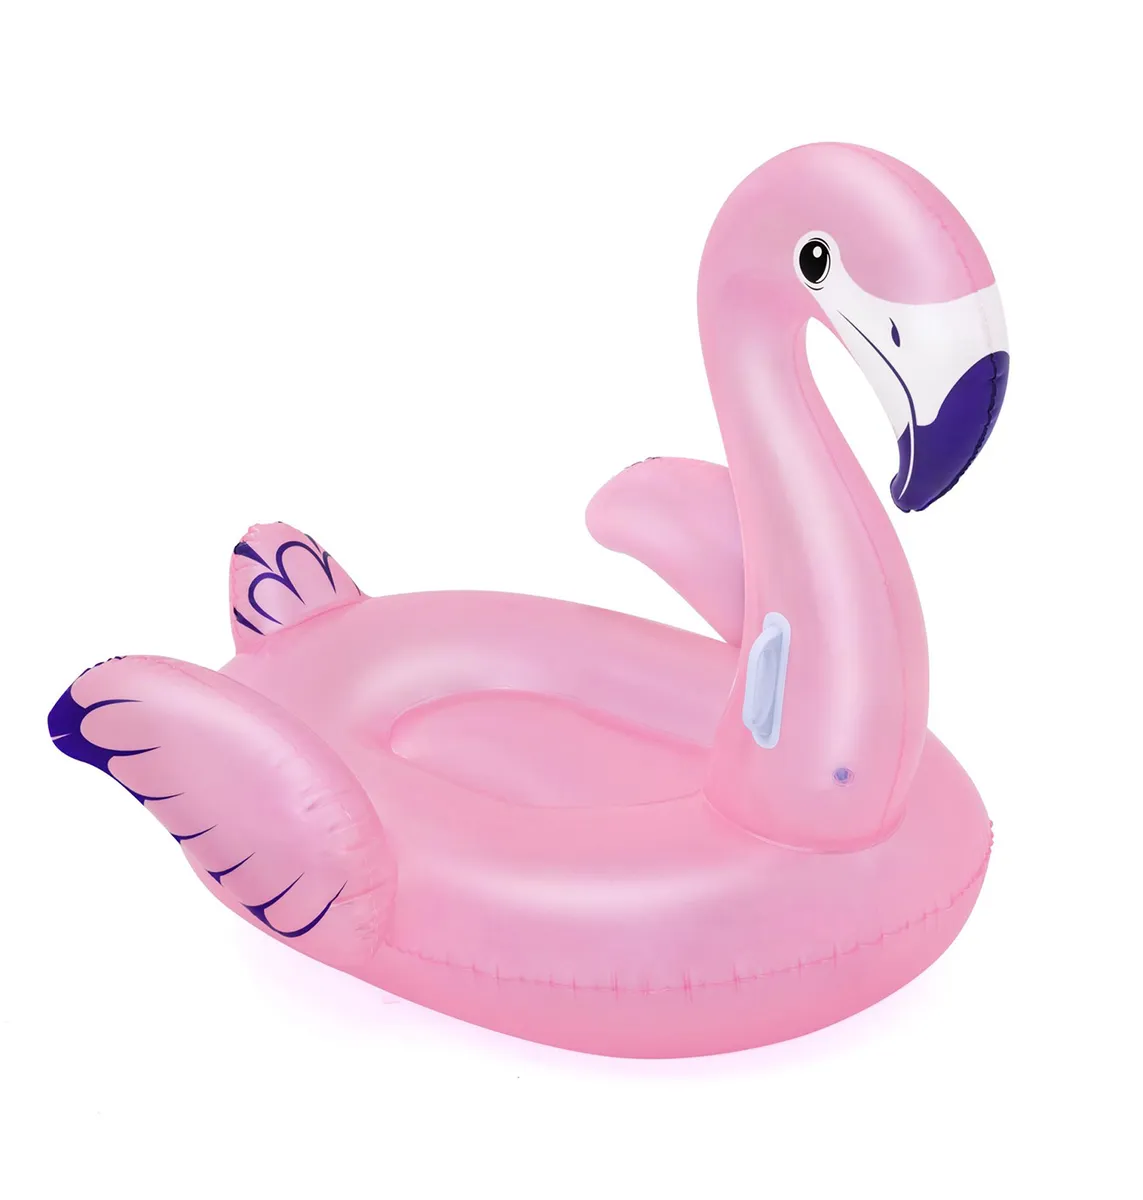 BOUEE GONFLABLE FLAMANT ROSE 153x143cm